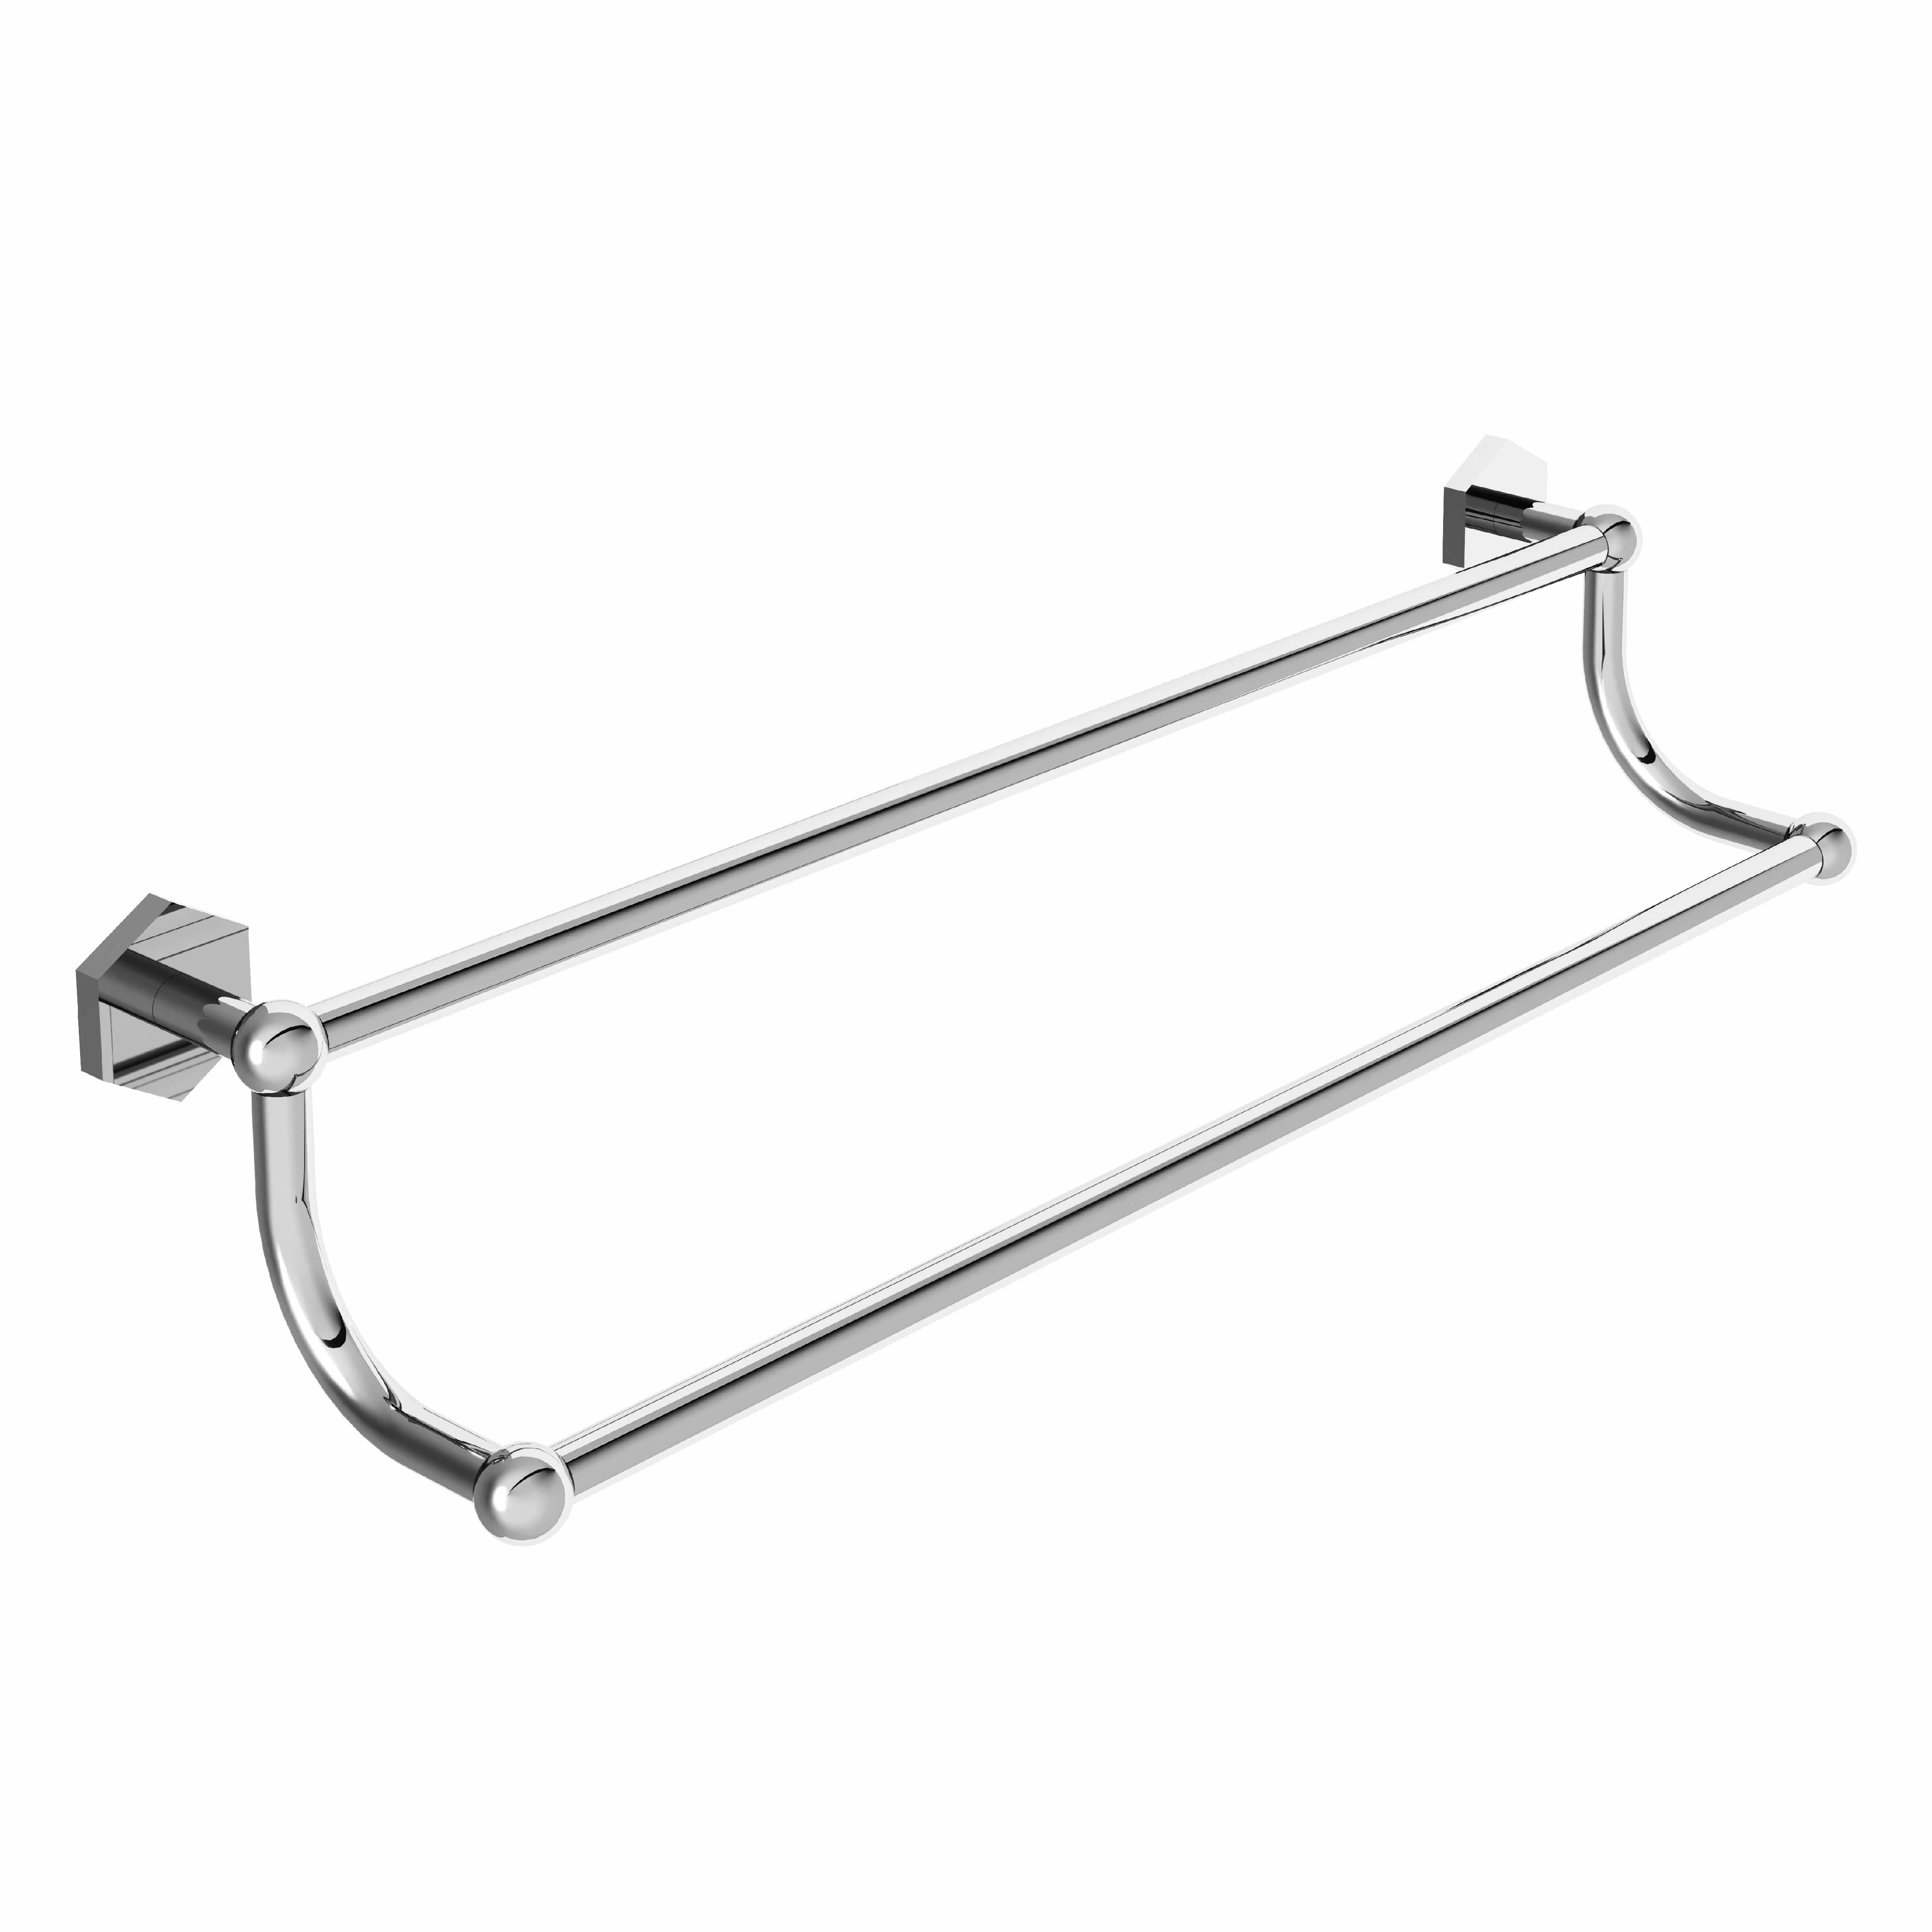 M30-509 Wall mounted double towel bar